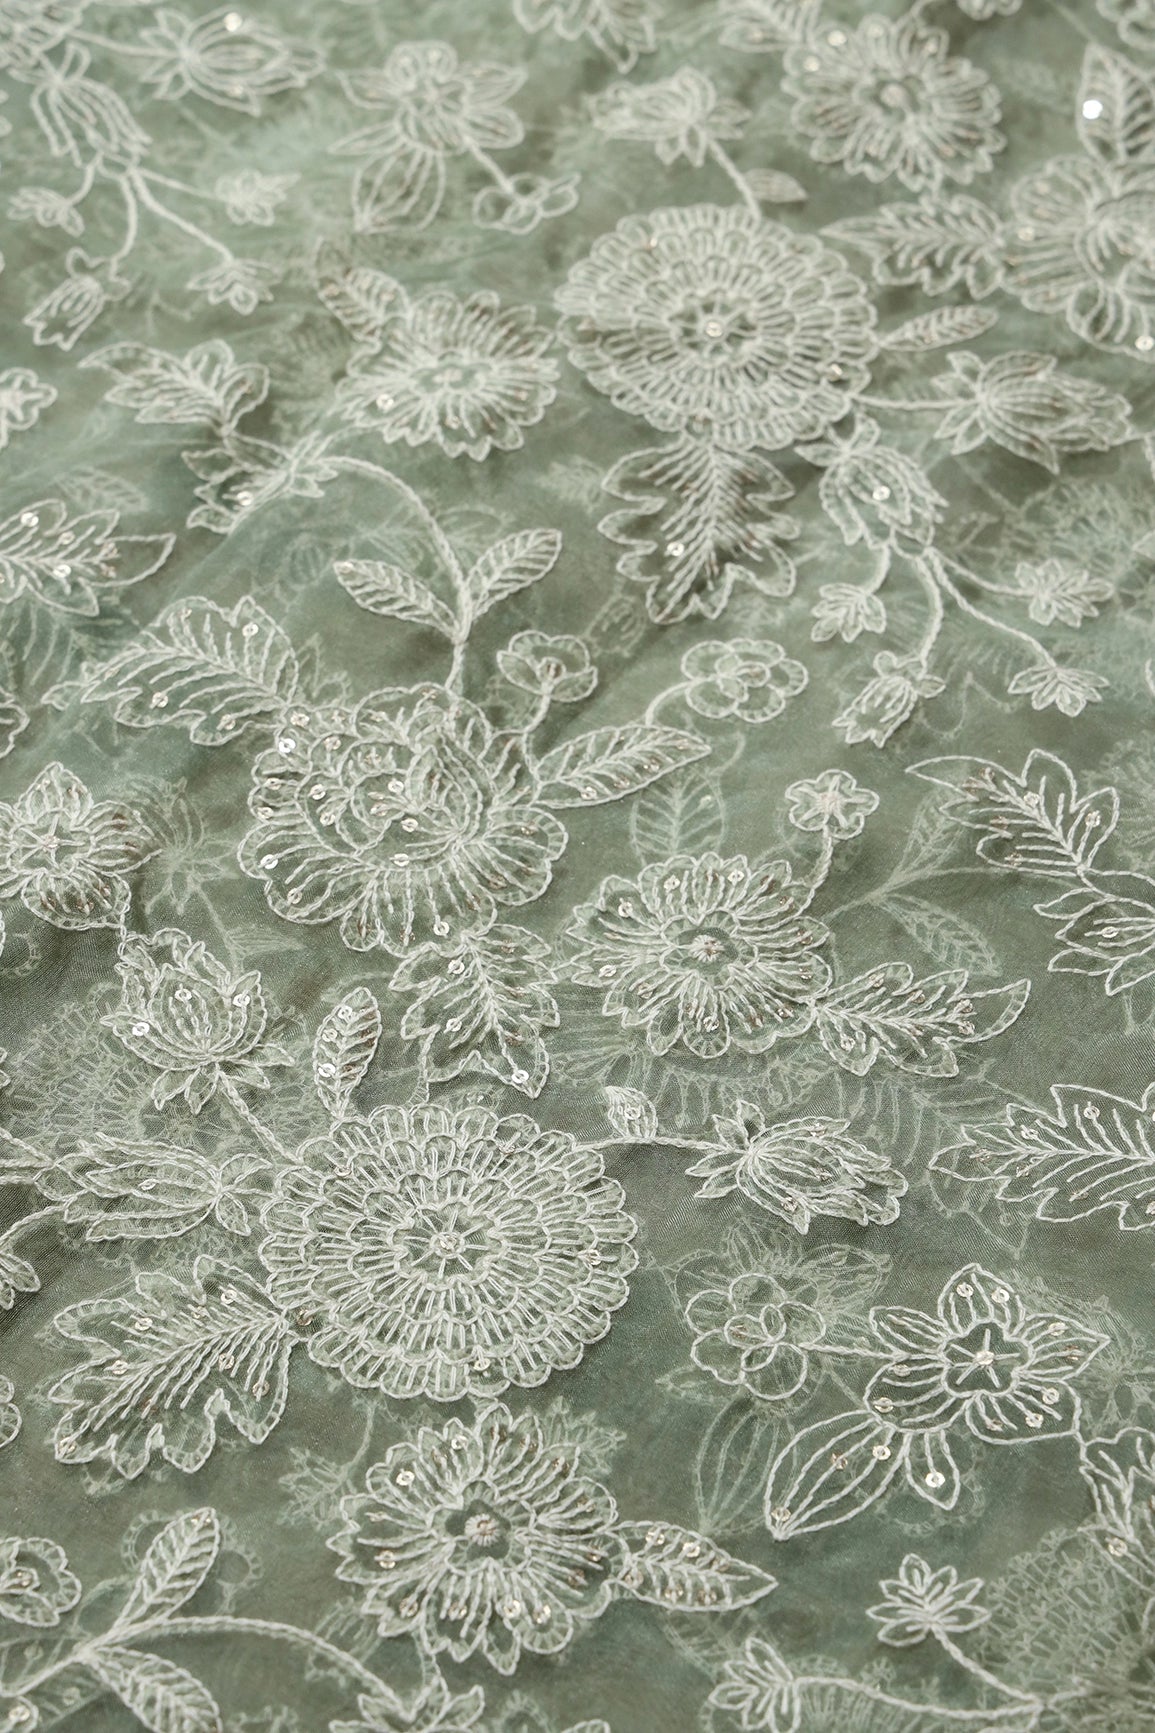 3 Meter Cut Piece Of White Thread With Gold Sequins Floral Embroidery On Olive Organza Fabric - doeraa